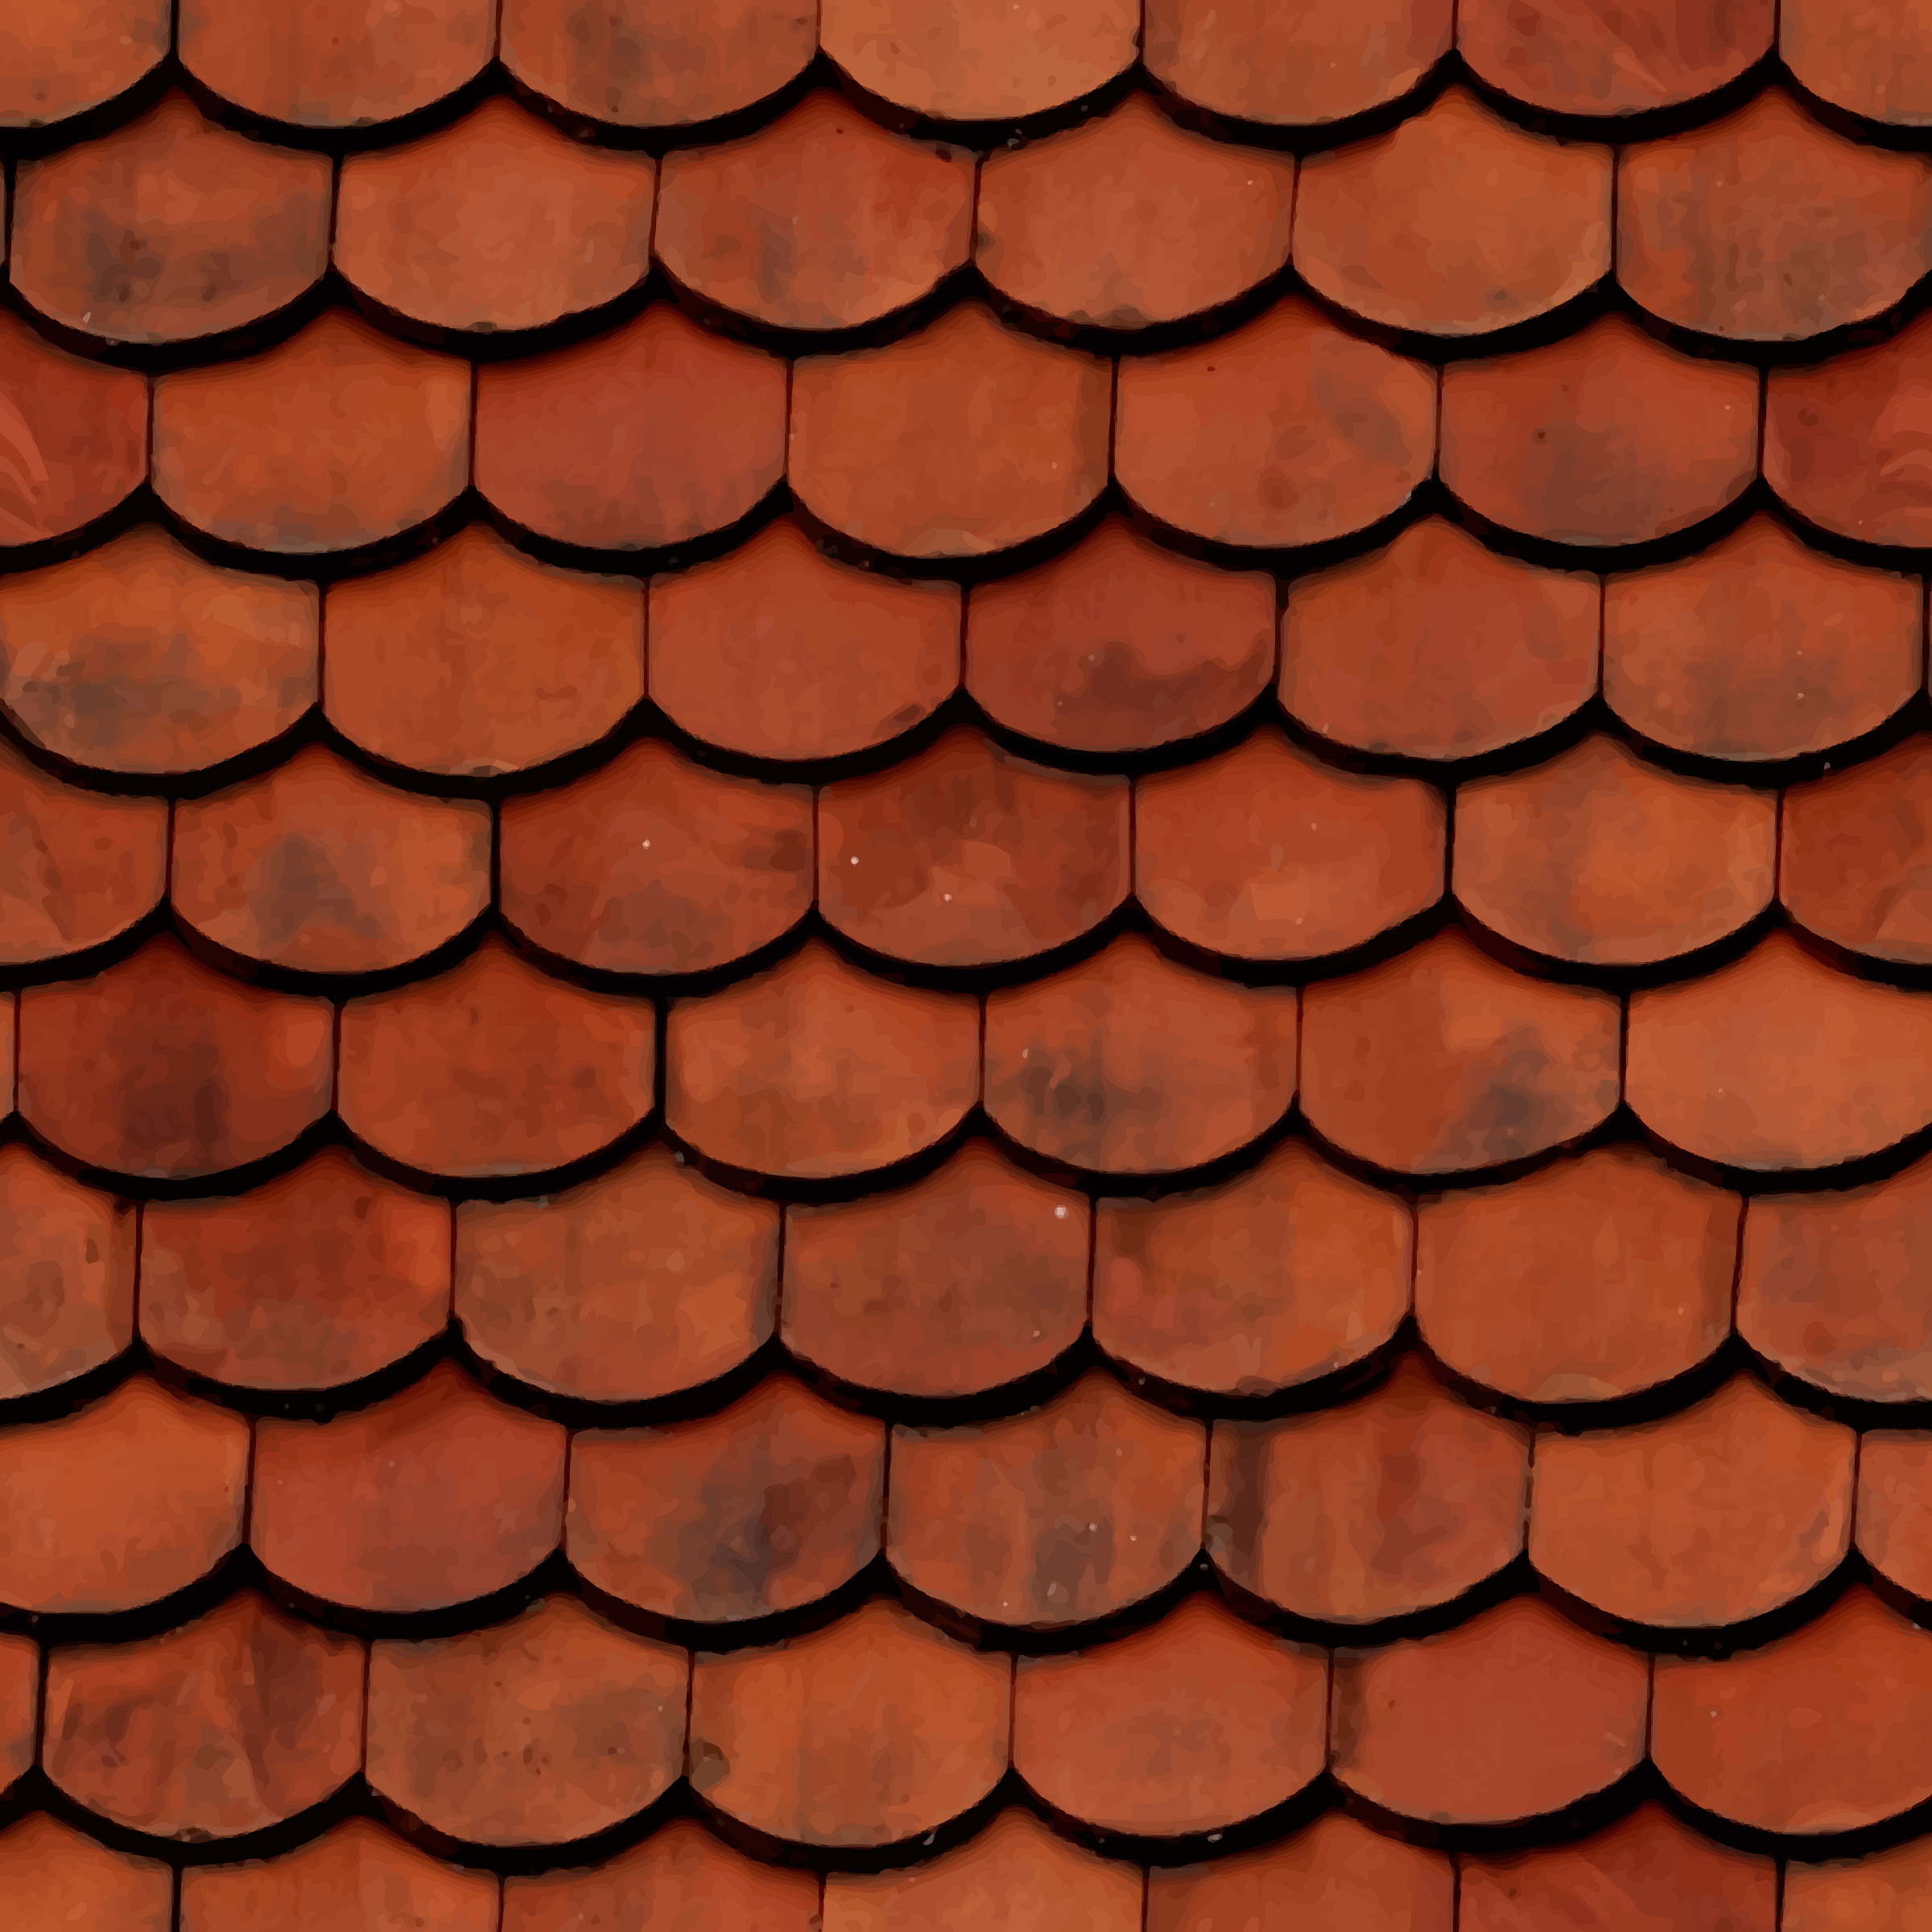 Roofing tiles clipart - Clipground